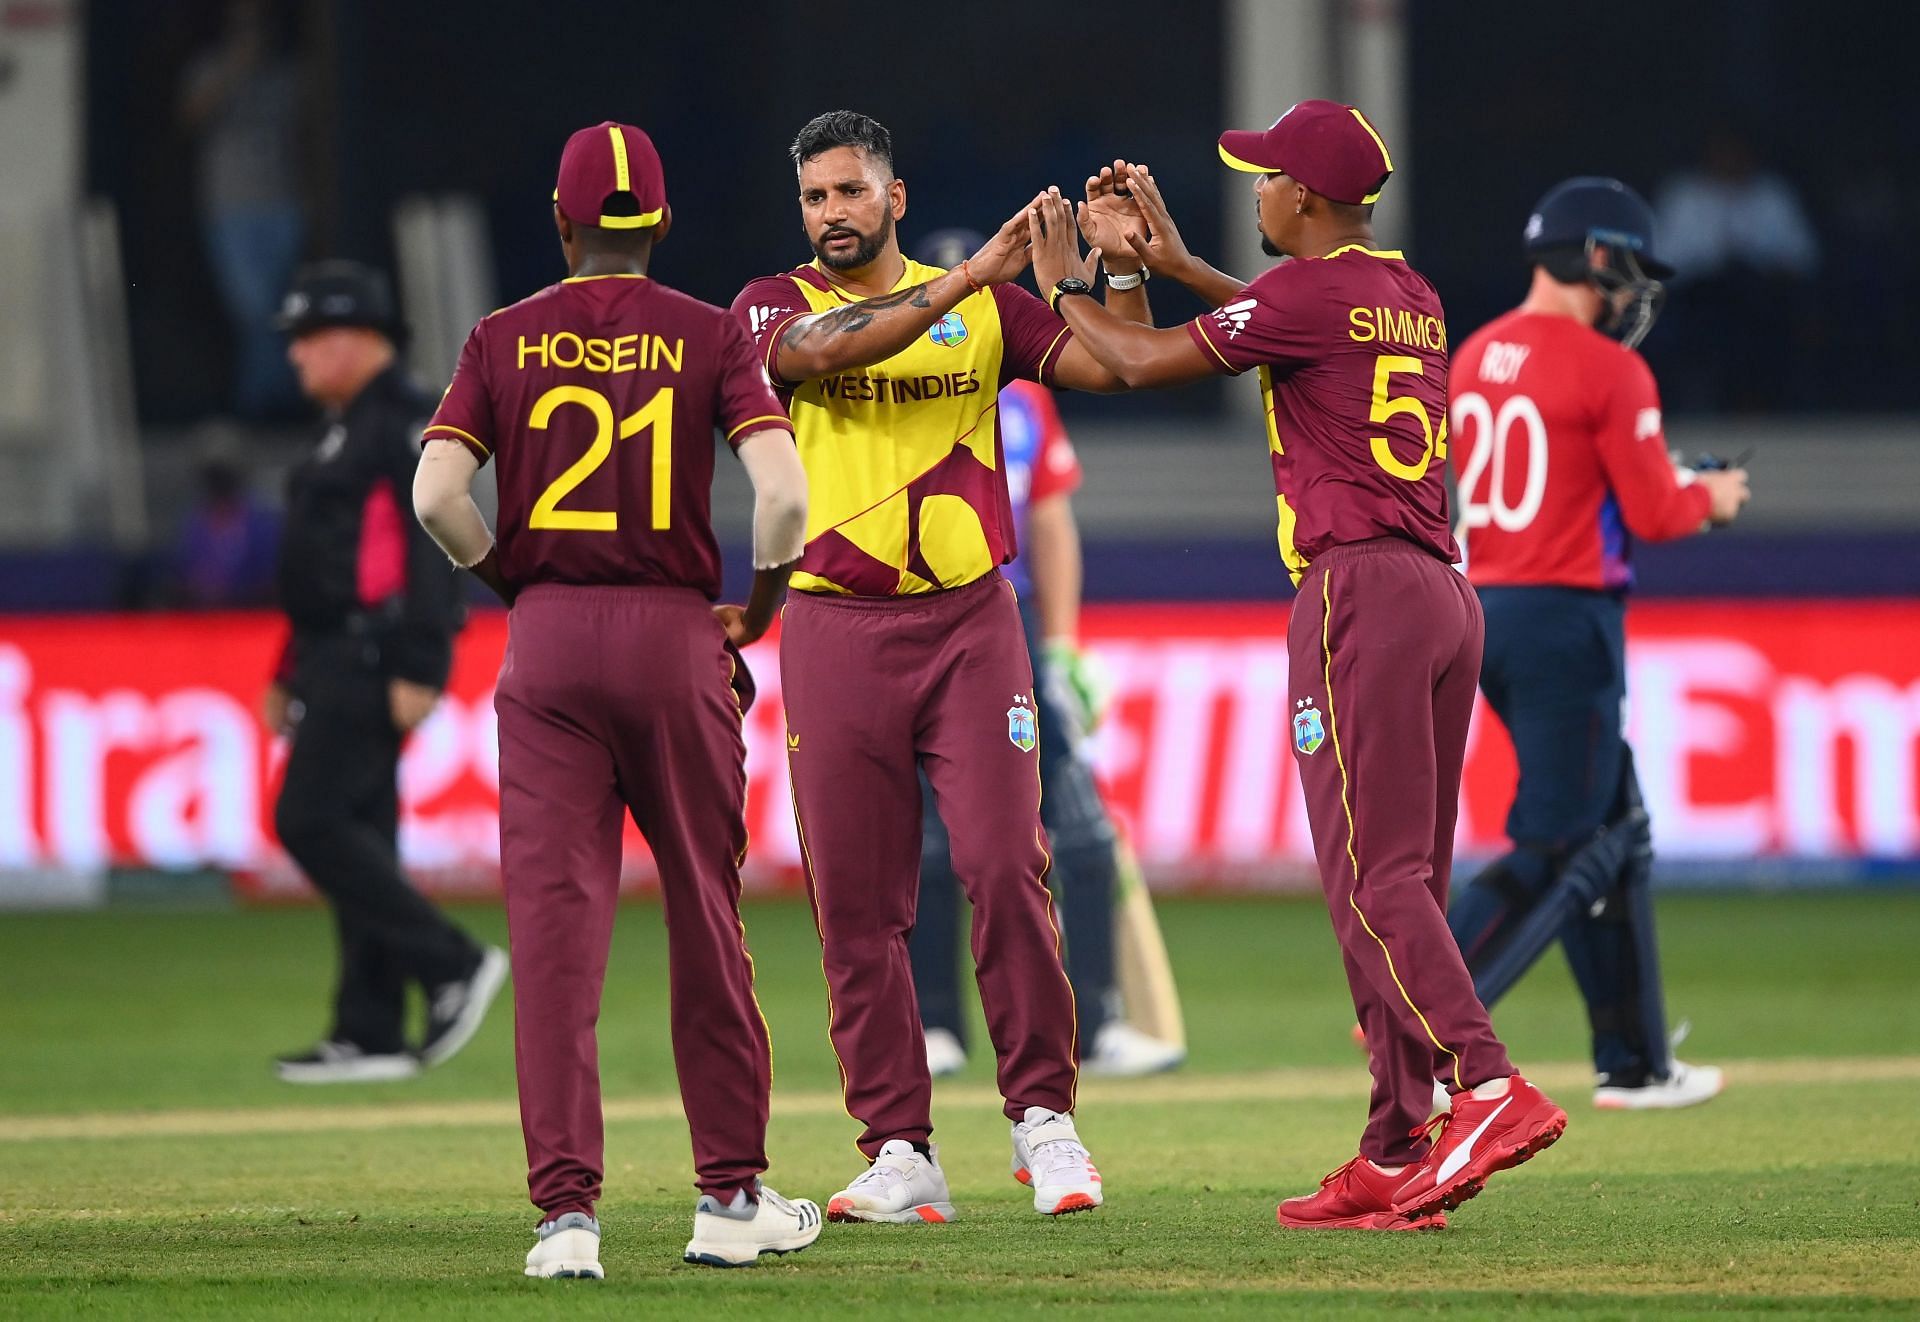 Can the West Indies bounce back in ICC T20 World Cup 2021?